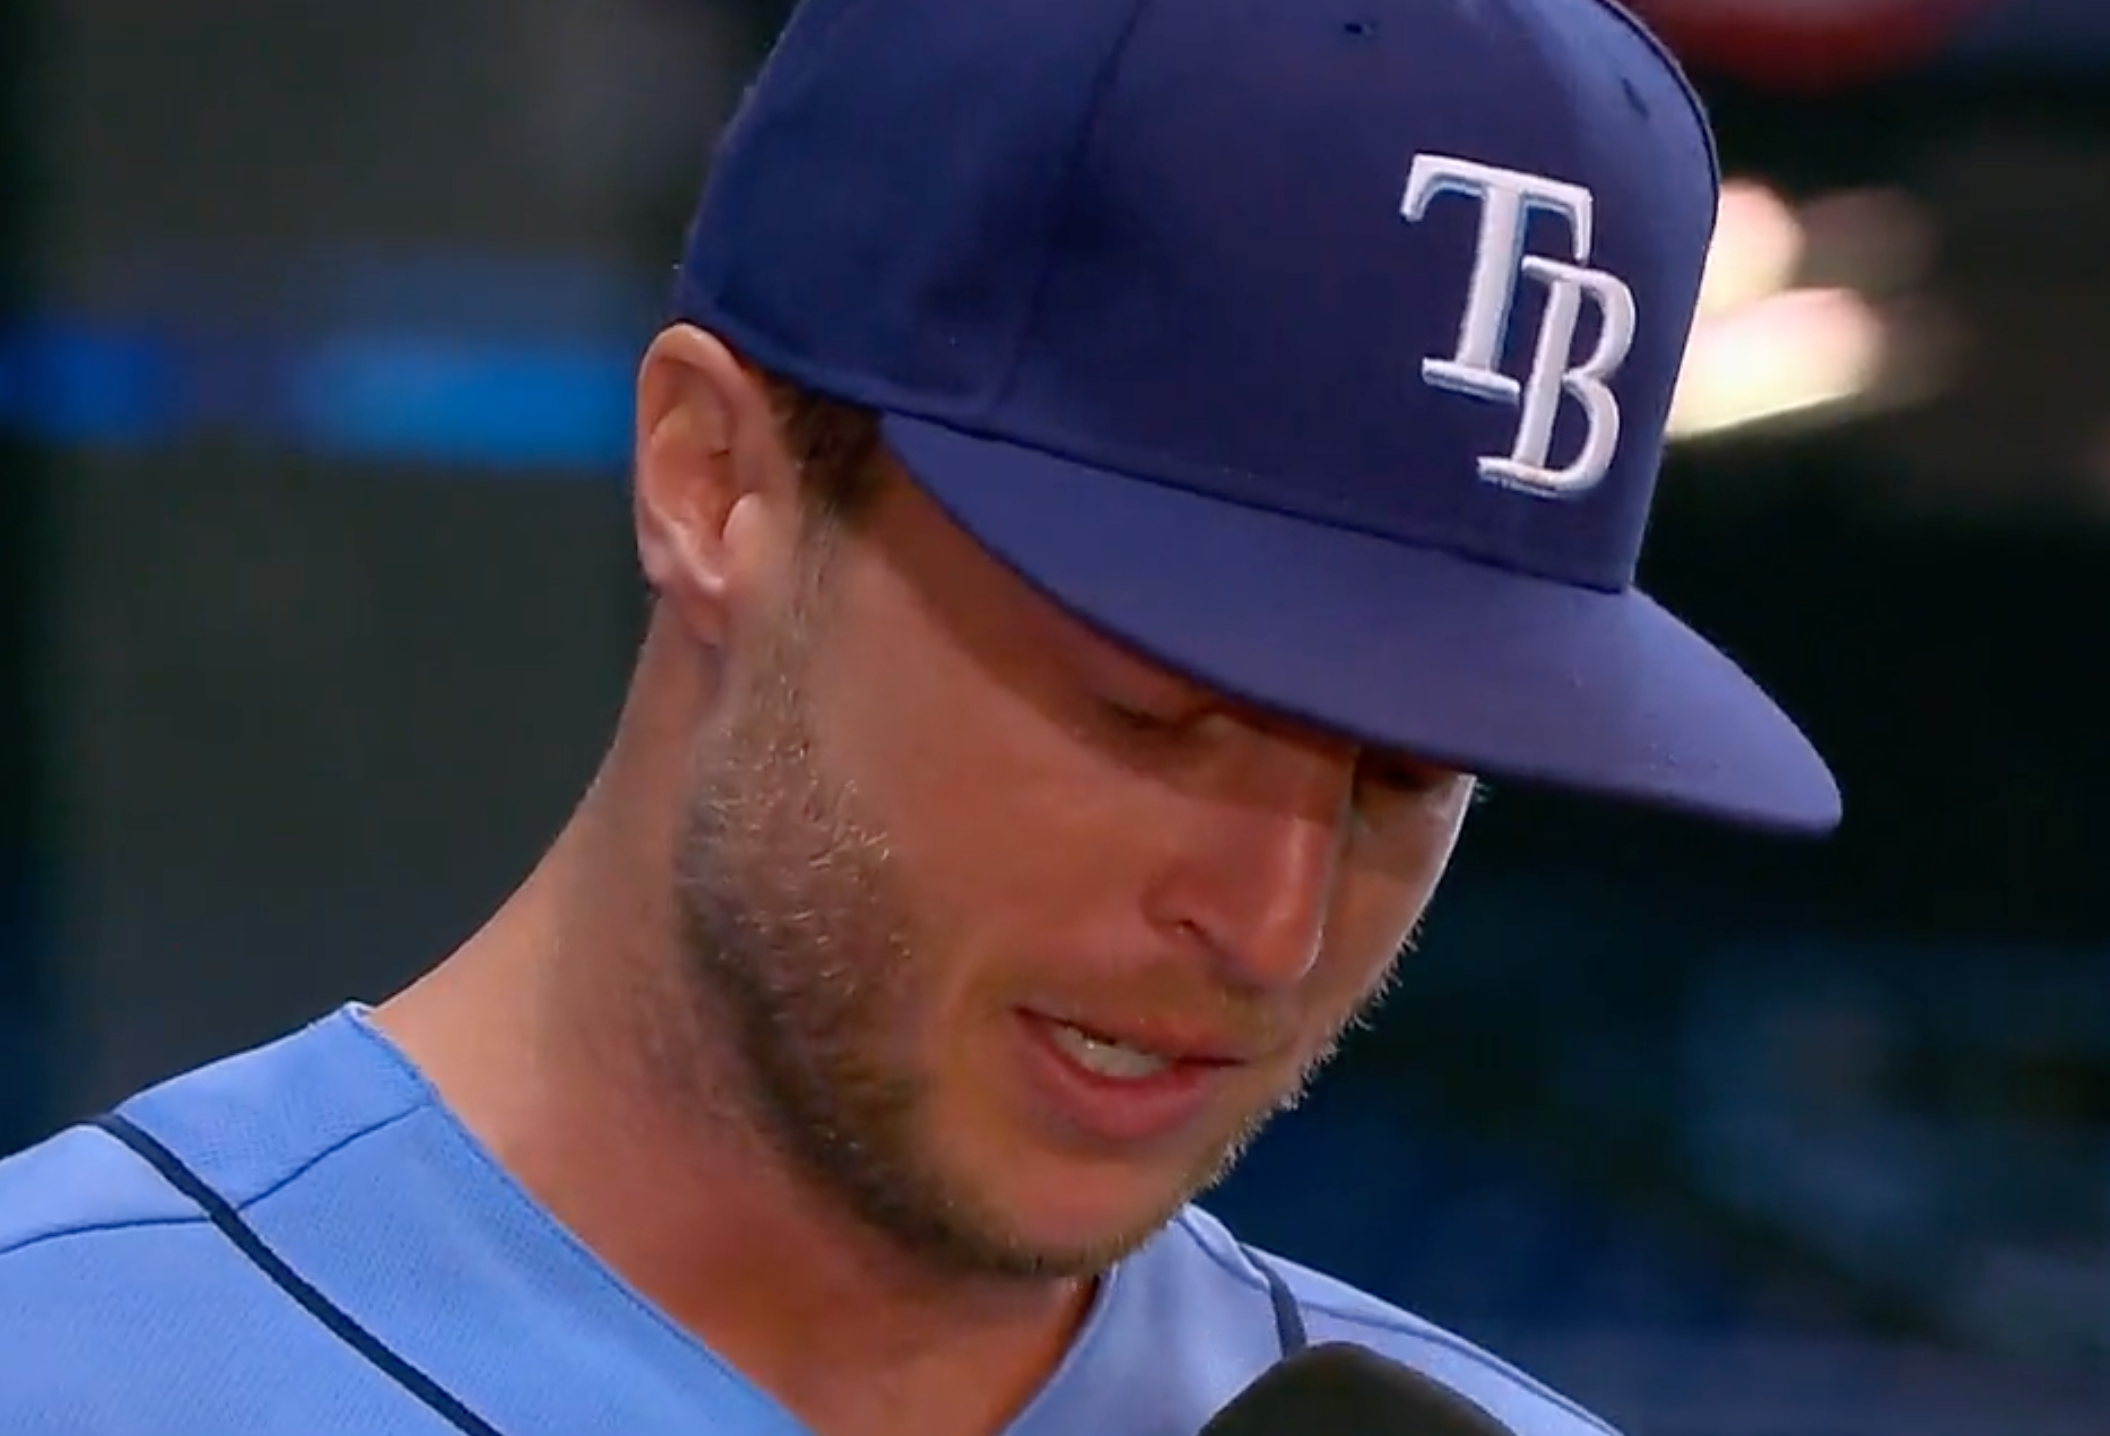 Brett Phillips returns to face Rays with some things on his mind